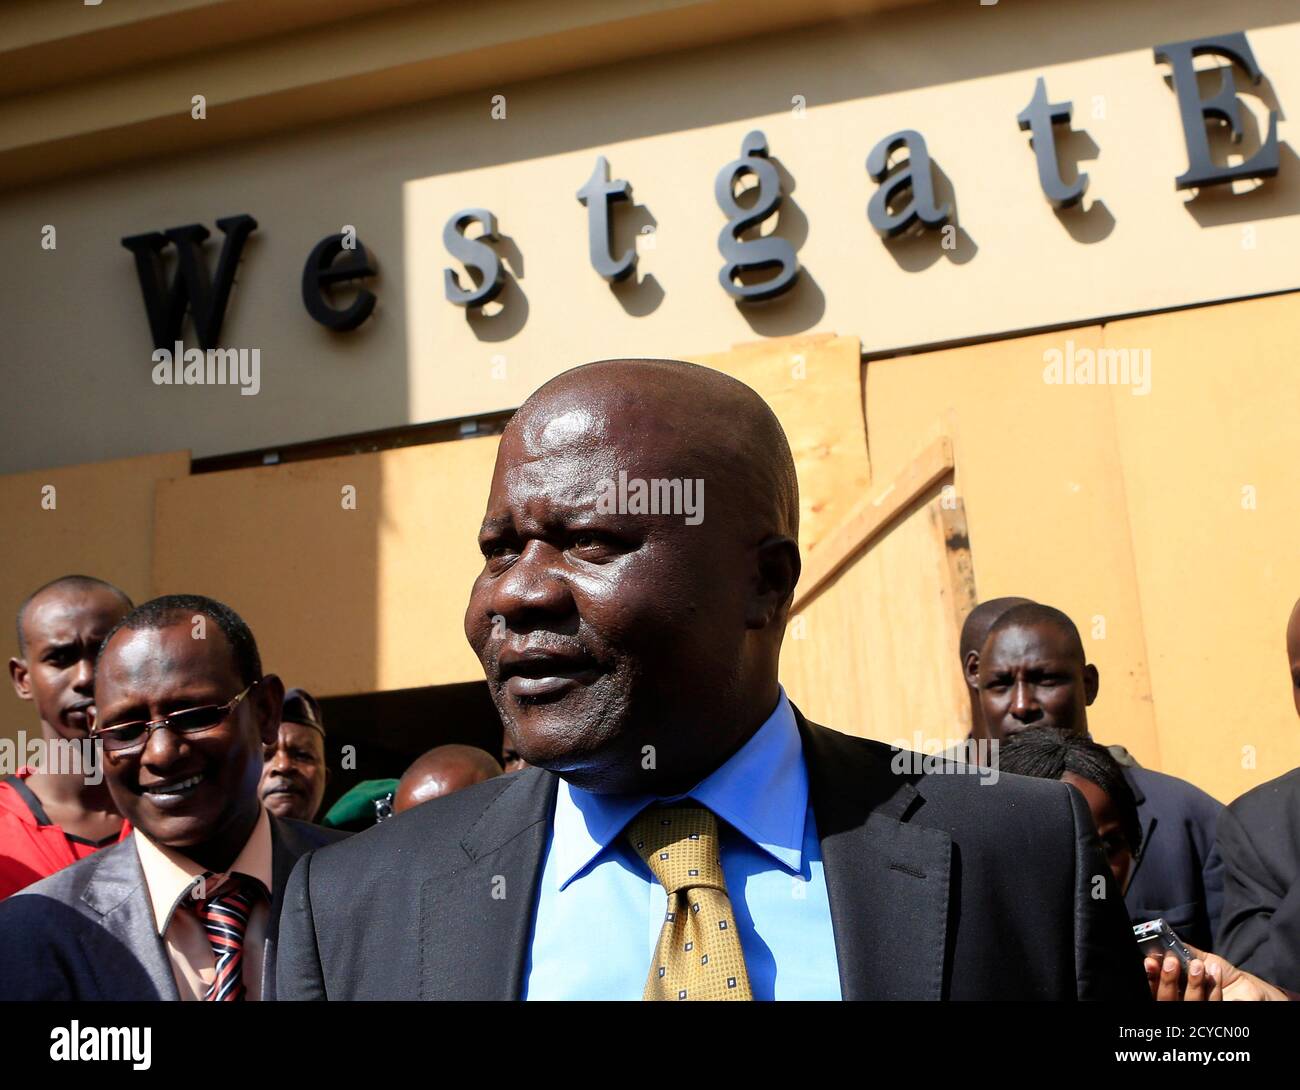 Kenya's acting chief magistrate Daniel Ochenja is pictured at the main entrance of Westgate Shopping Mall, during an investigation of the crime scene in the trial of four men charged with helping al Qaeda-linked militants launch an attack on the mall, in Nairobi January 21, 2014.  The trial for the four Somali men, accused of giving support and shelter to gunmen who killed at least 67 people during the assault on Nairobi's Westgate complex that started on September 21, 2013, began last week. The assault was claimed by the Somali Islamist rebel group al Shabaab. REUTERS/Noor Khamis (KENYA - Tag Stock Photo